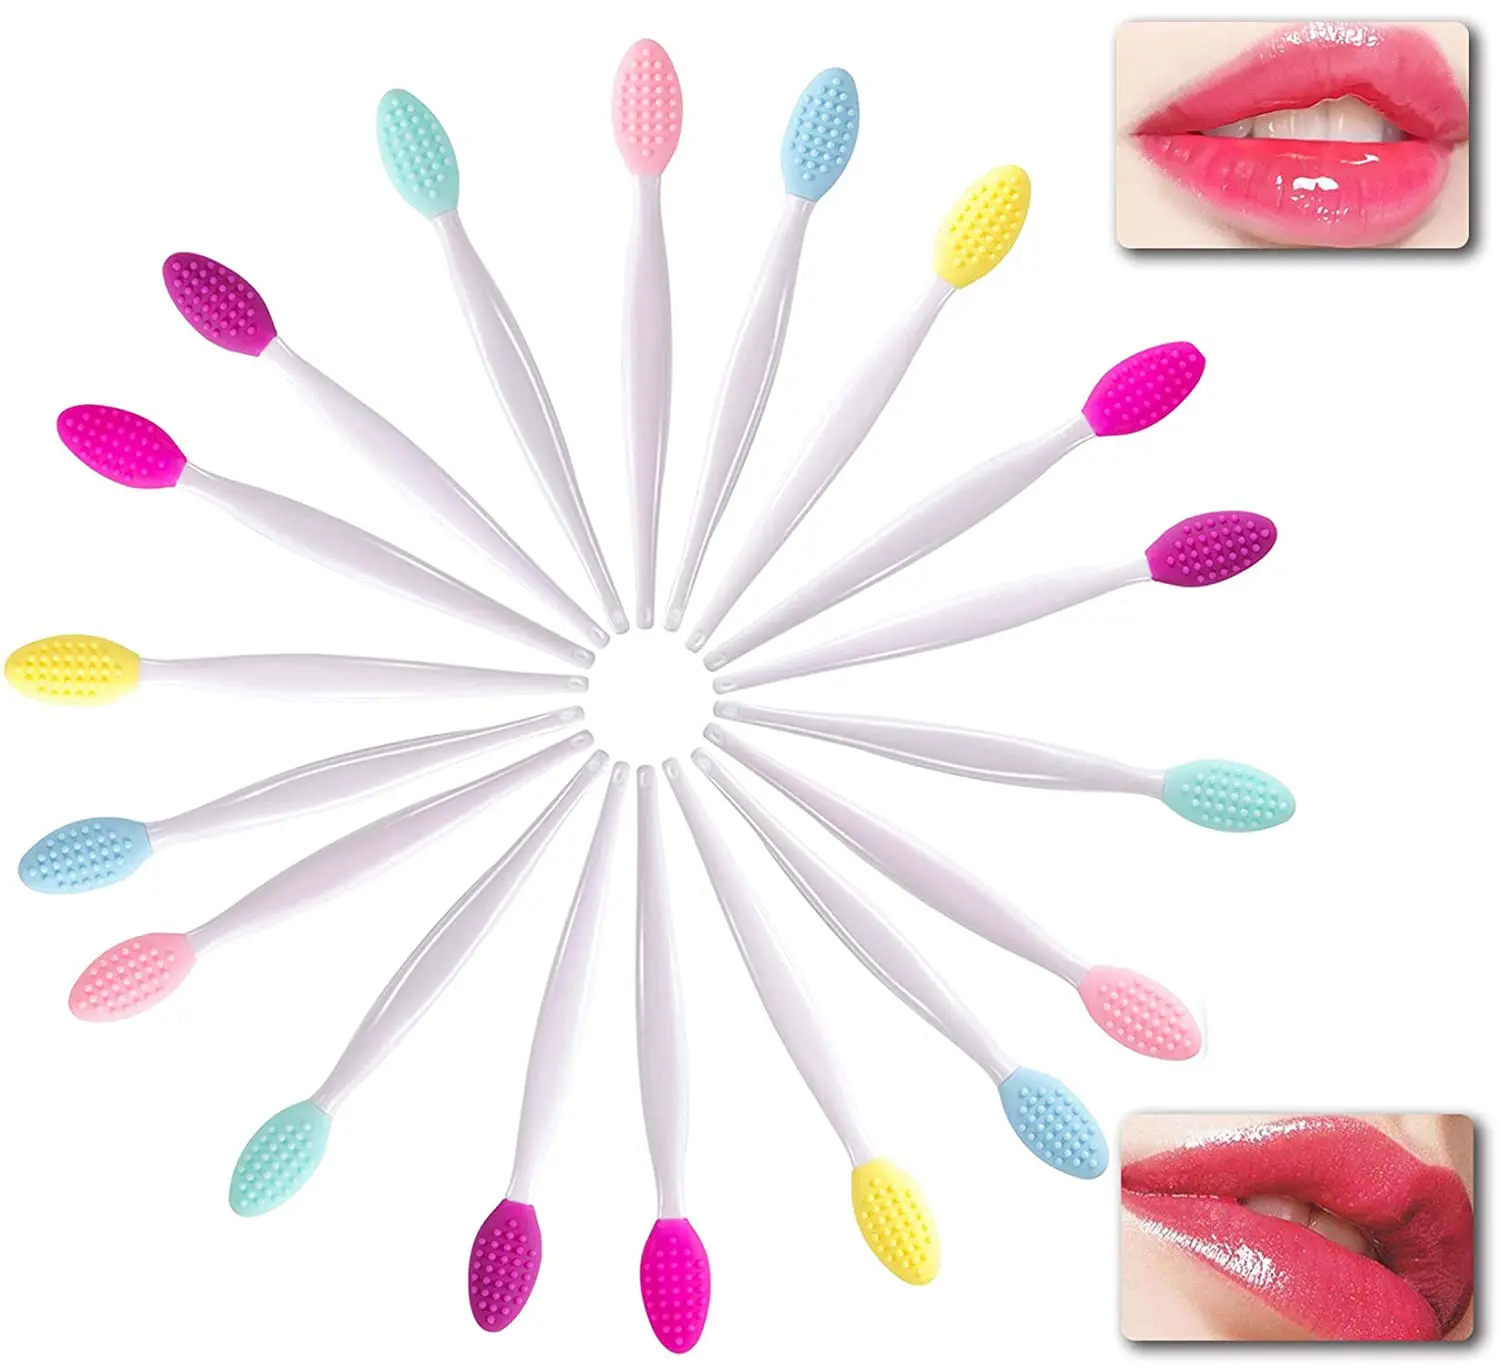 

Custom Logo Lip Scrub Brush Double-Sided Silicone Exfoliating Lip Brush Tools For Nose Blackhead Cleansing Of Skin And Lips, Blue,pink,rose red,green,yellow,purple